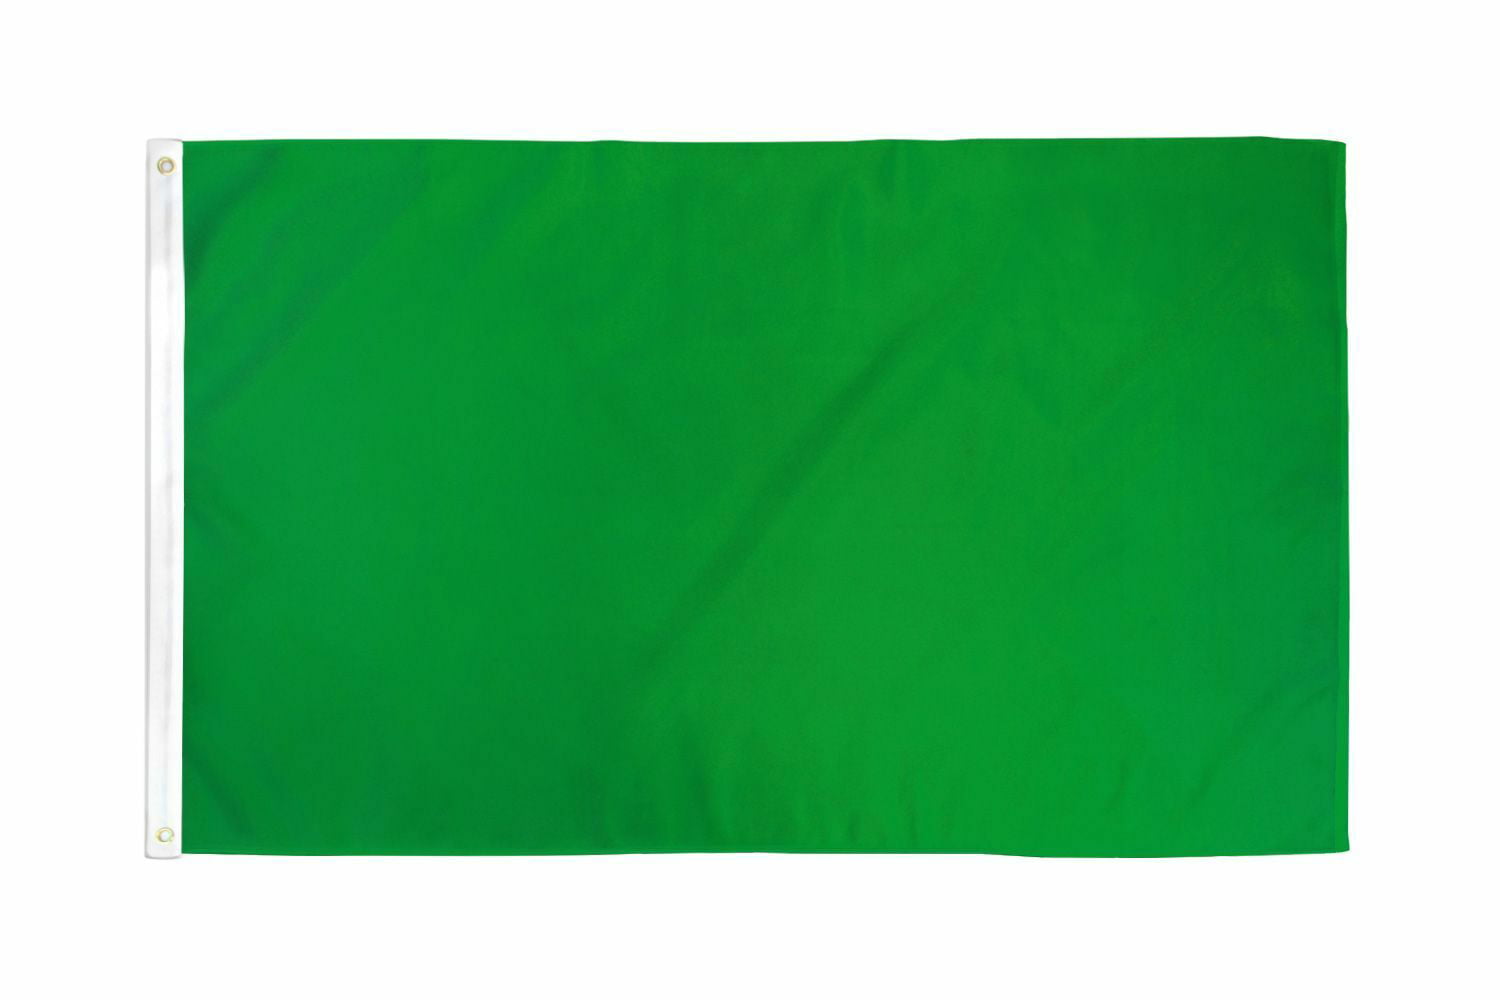 FI 3x5 Norway Country Premium 210D 3'x5' Knitted Poly Nylon DuraFlag Banner